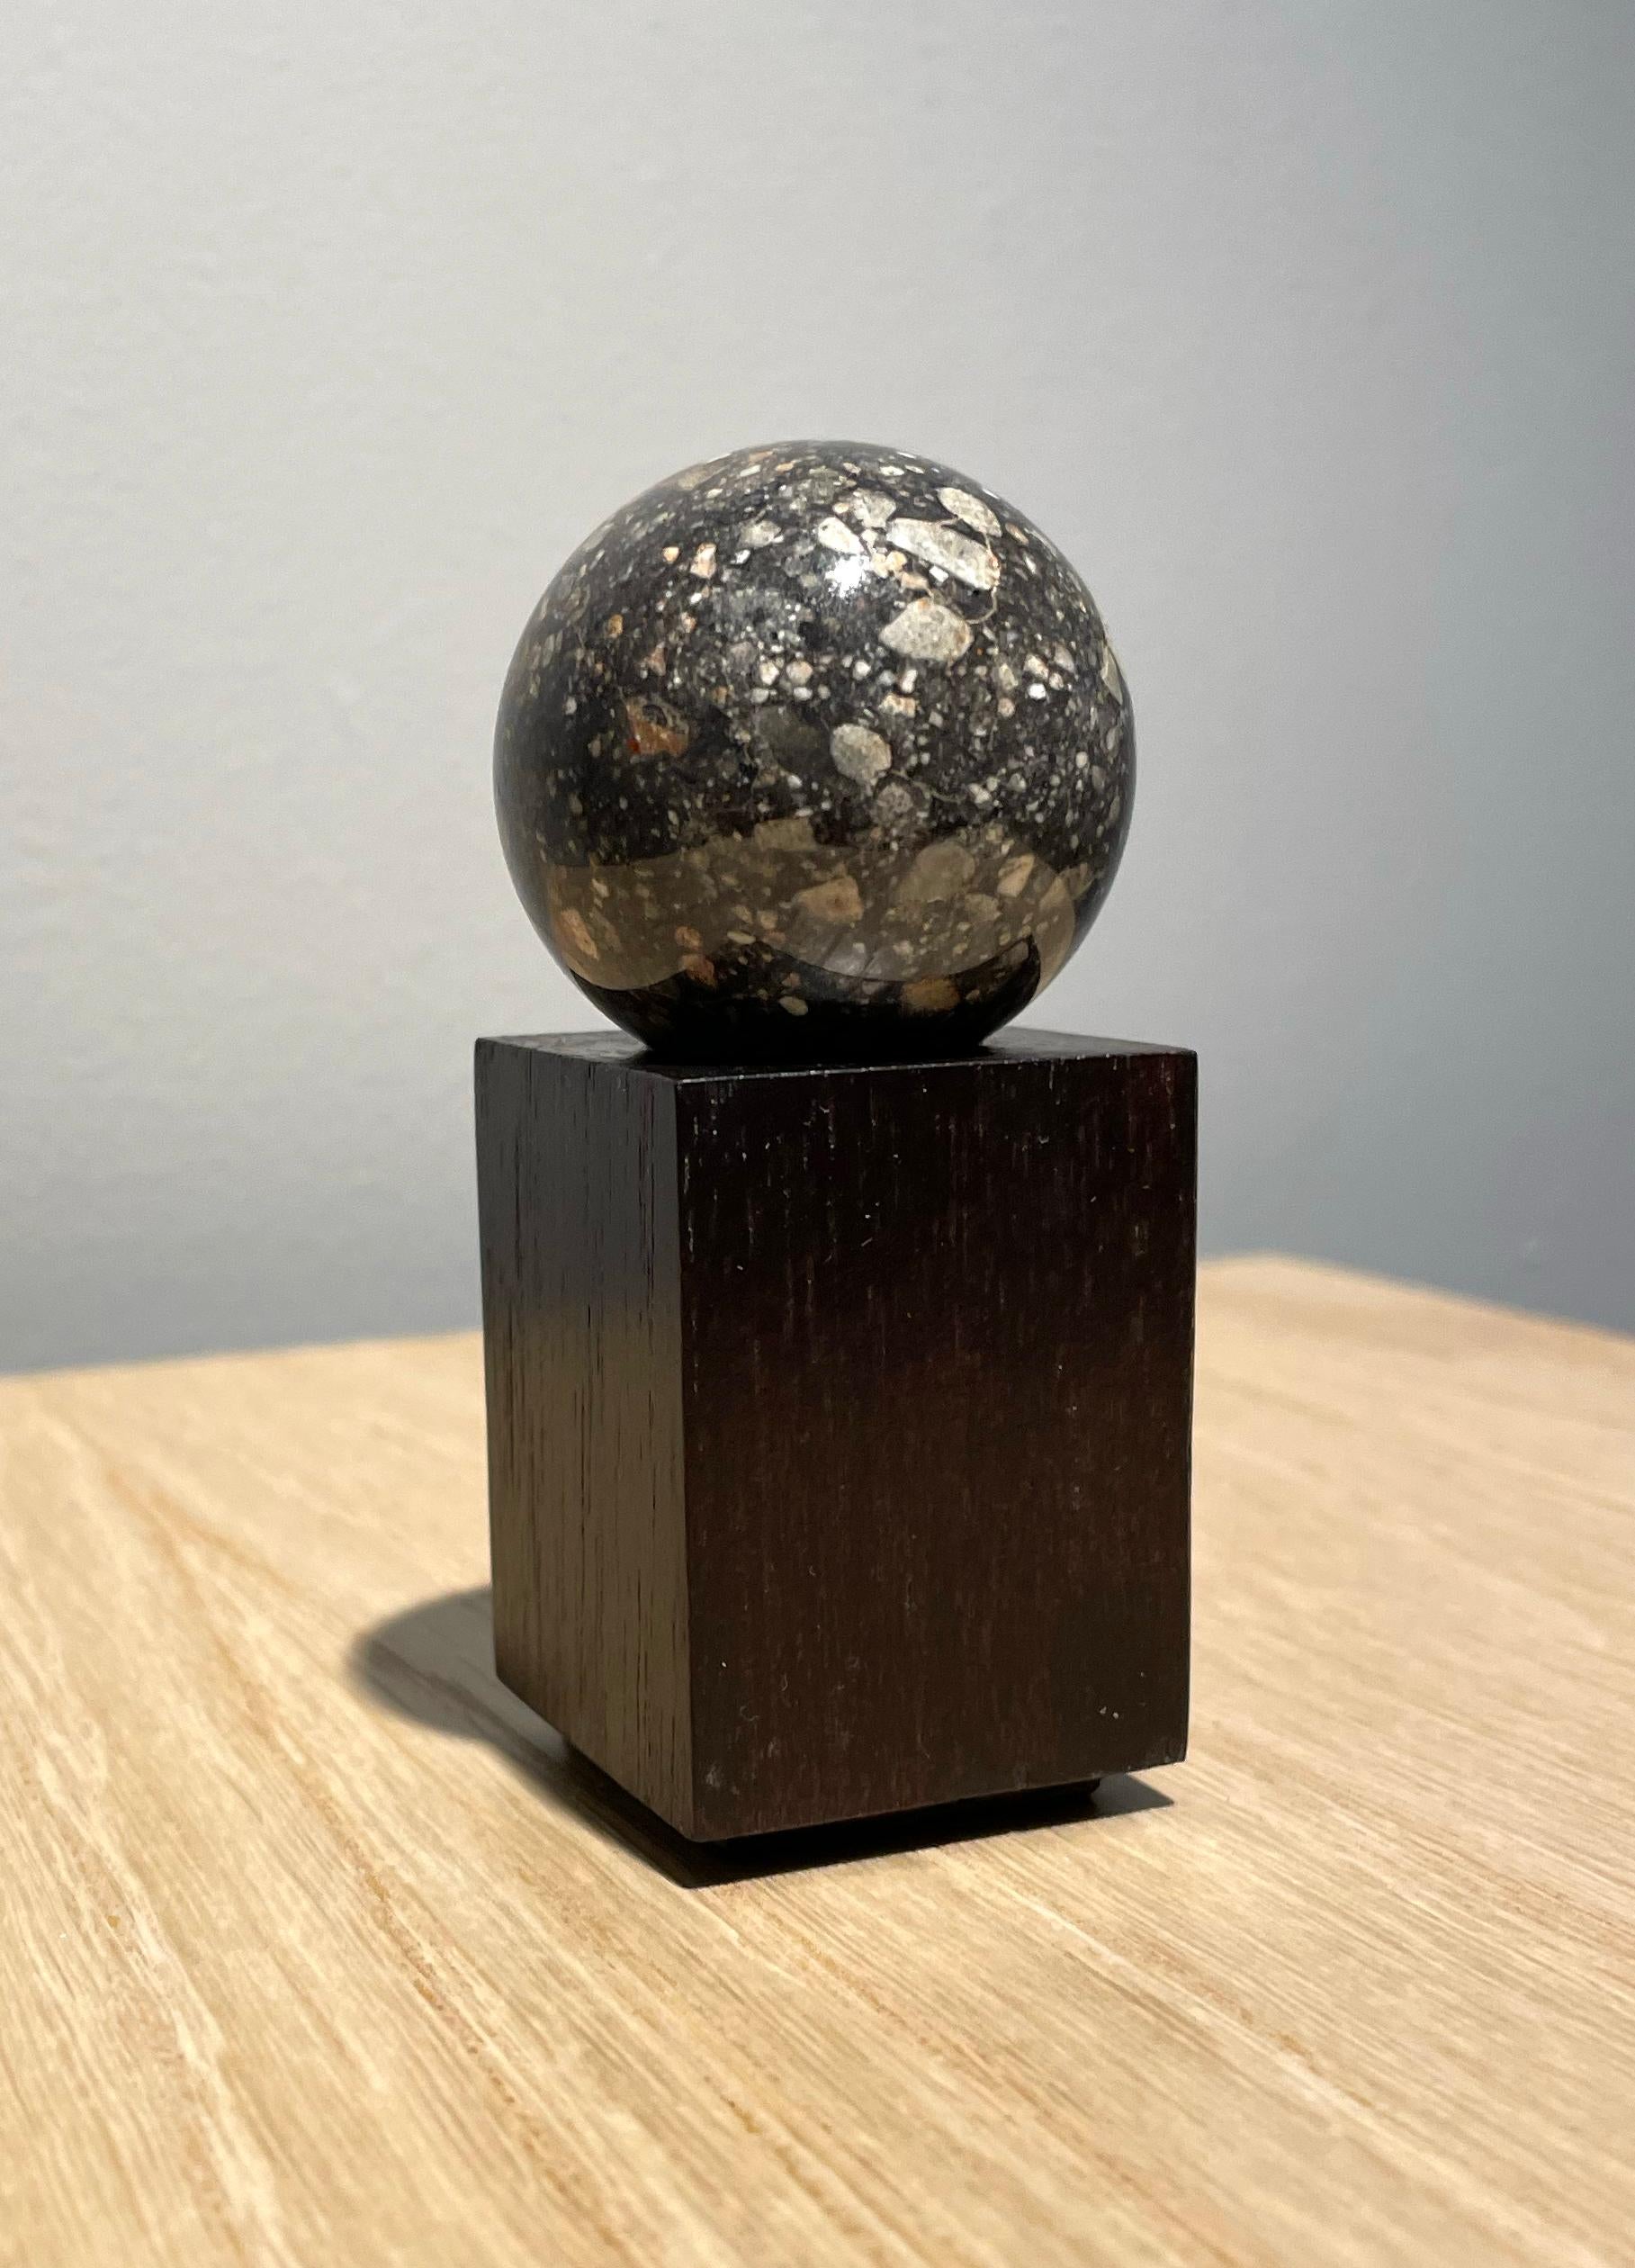 RARE LUNAR SPHERE
'Lunar feldspathic breccia'

Approximately 4.5 billion years ago 
4 cm diameter
Sahara Desert, Mauritania 

The moon is one of the rarest materials on earth. Every lunar meteorite known could be contained within just five